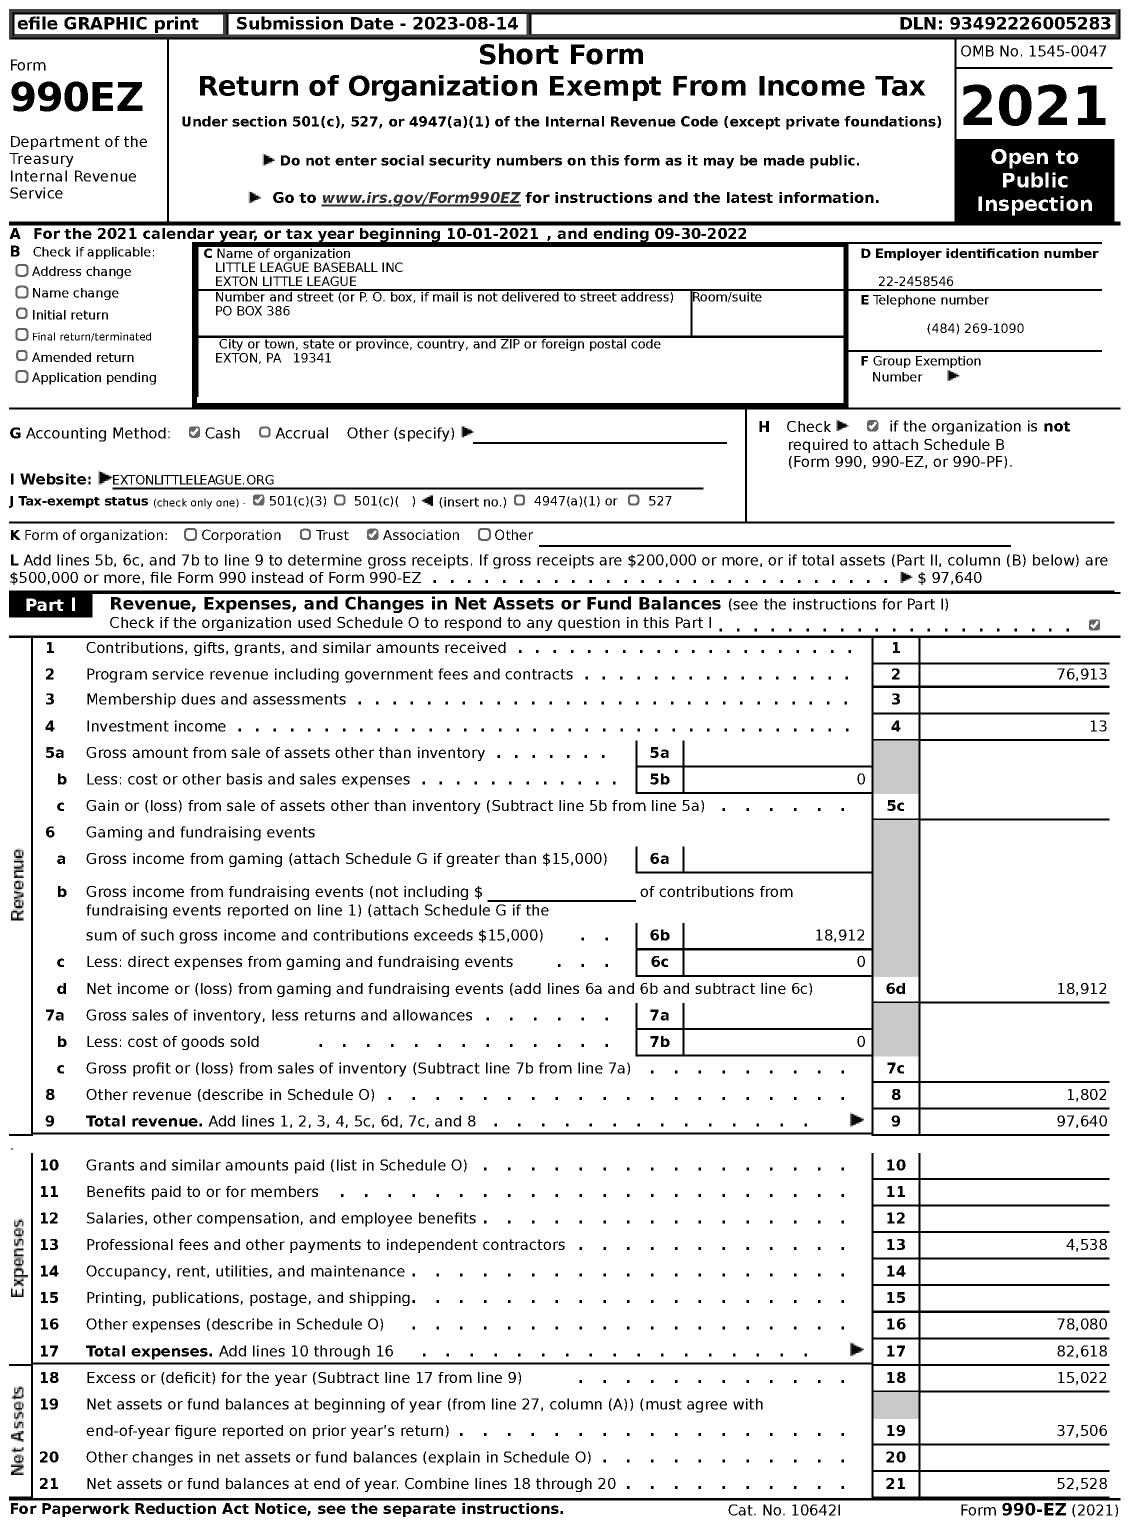 Image of first page of 2021 Form 990EZ for Little League Baseball - 2382706 Exton LL